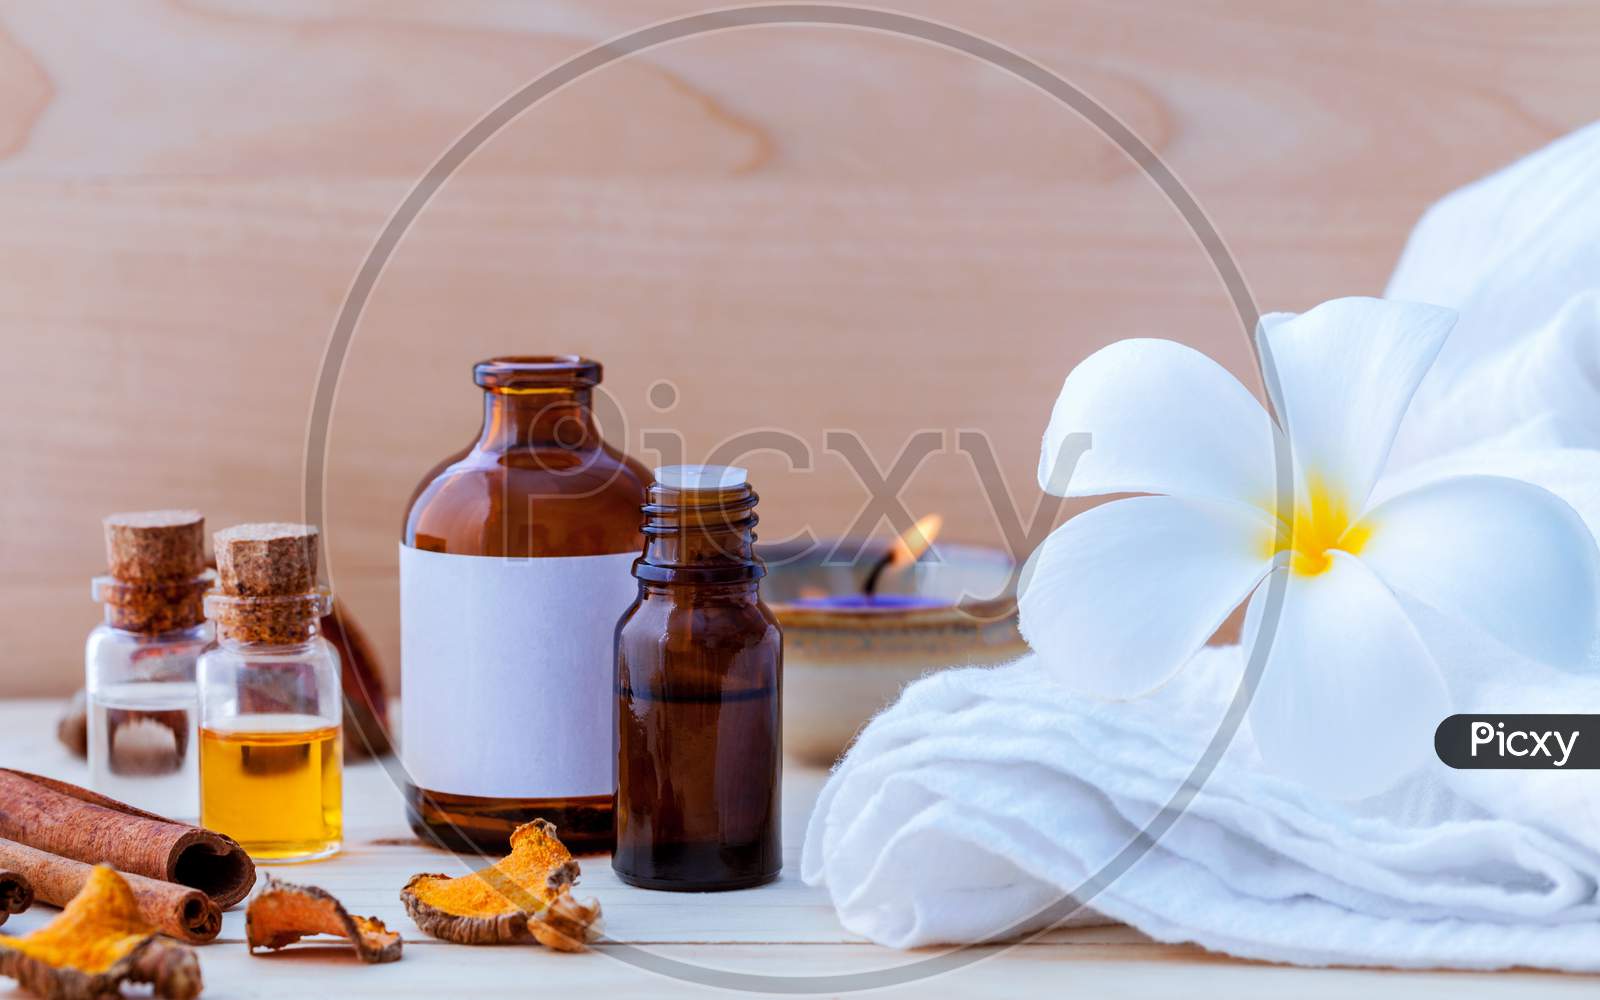 Natural Spa Ingredients And Bottle Of Herbal Extract Oil For Alternative Medicine And Aromatherapy. Thai Spa Theme With Ayurvedic Therapist On Shabby Wooden Background.